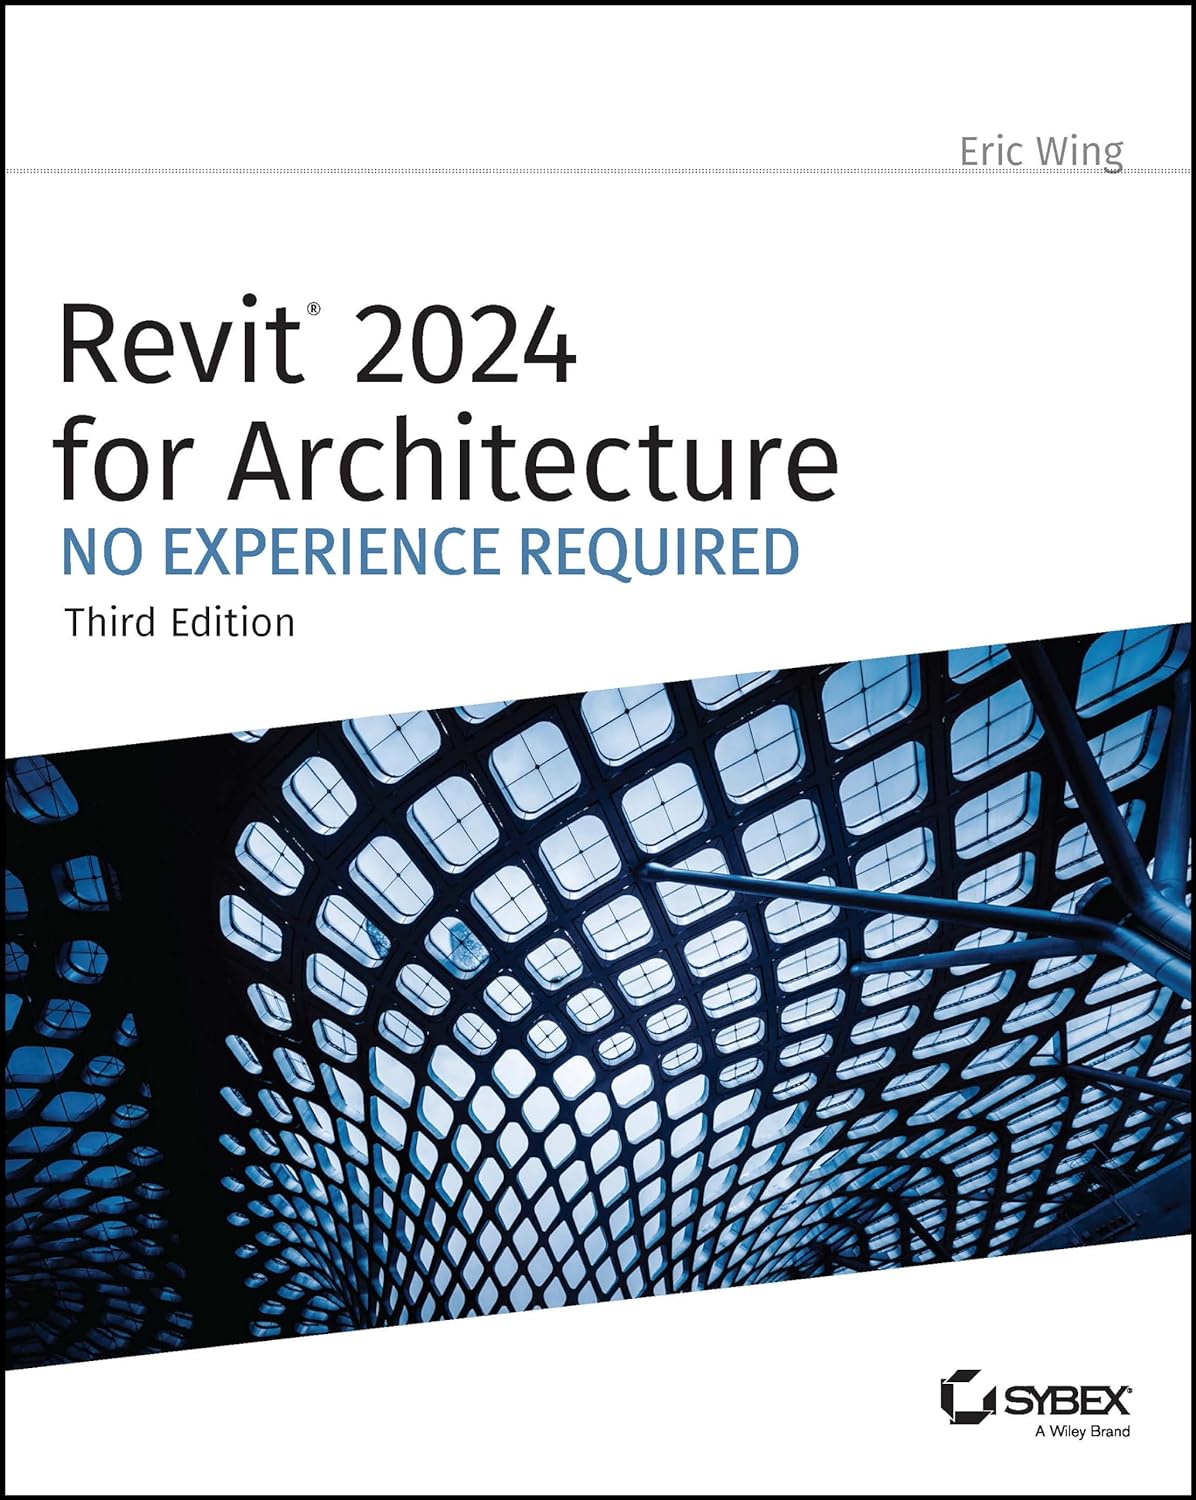 Revit 2024 for Architecture: No Experience Required